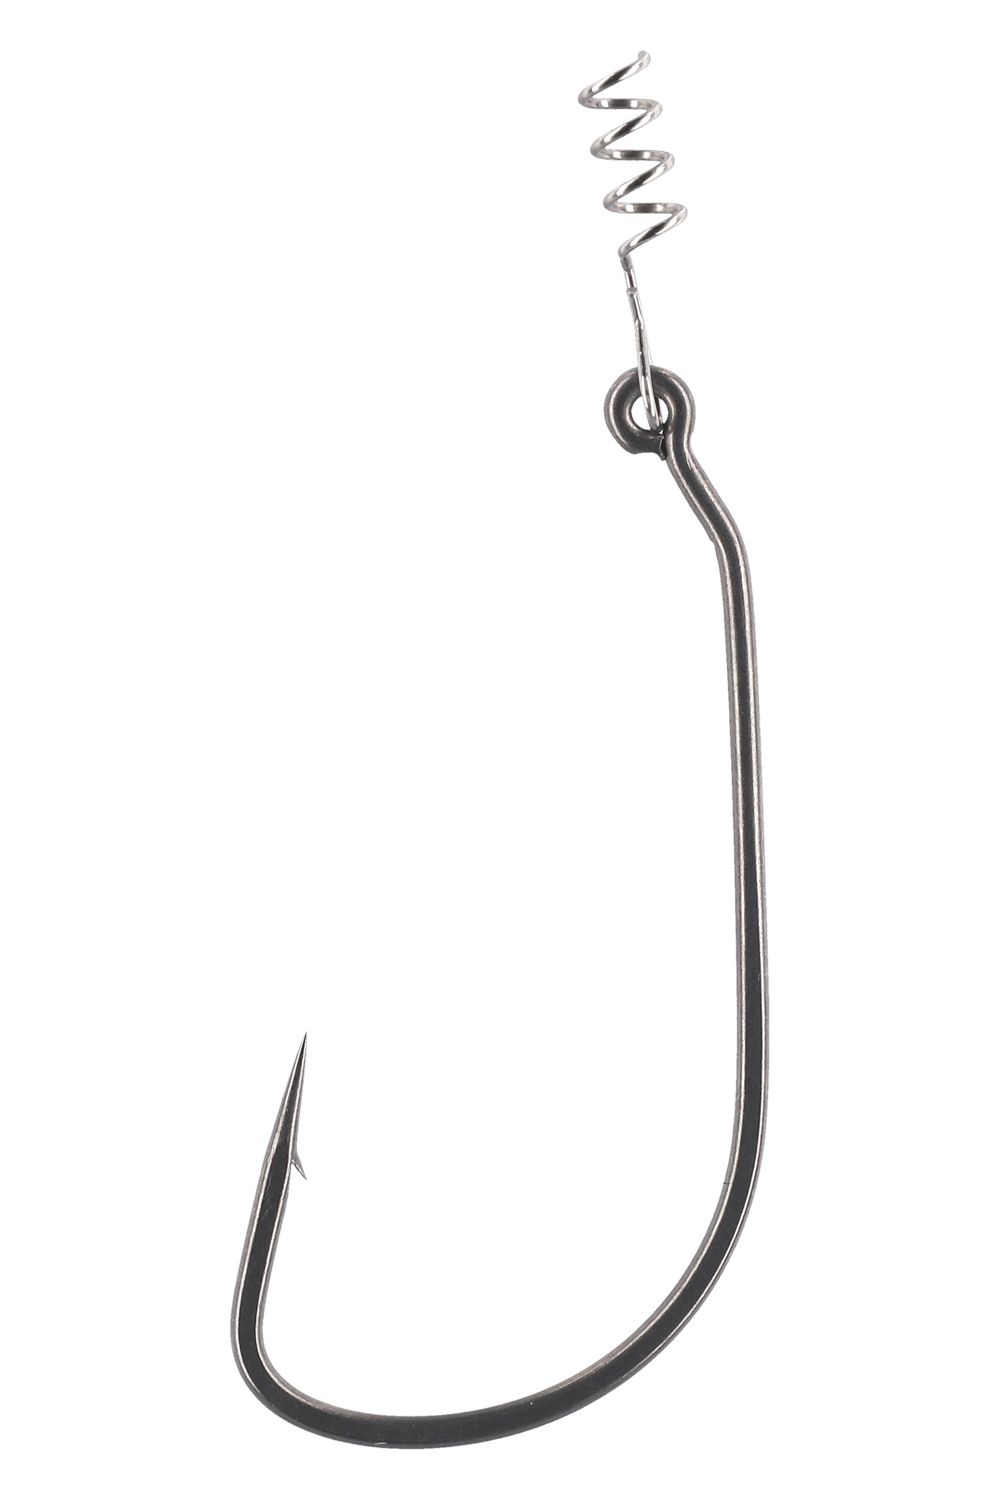 Mikado Offset Weedless Worm Hook With Screw Size: 2/0 – Glasgow Angling  Centre